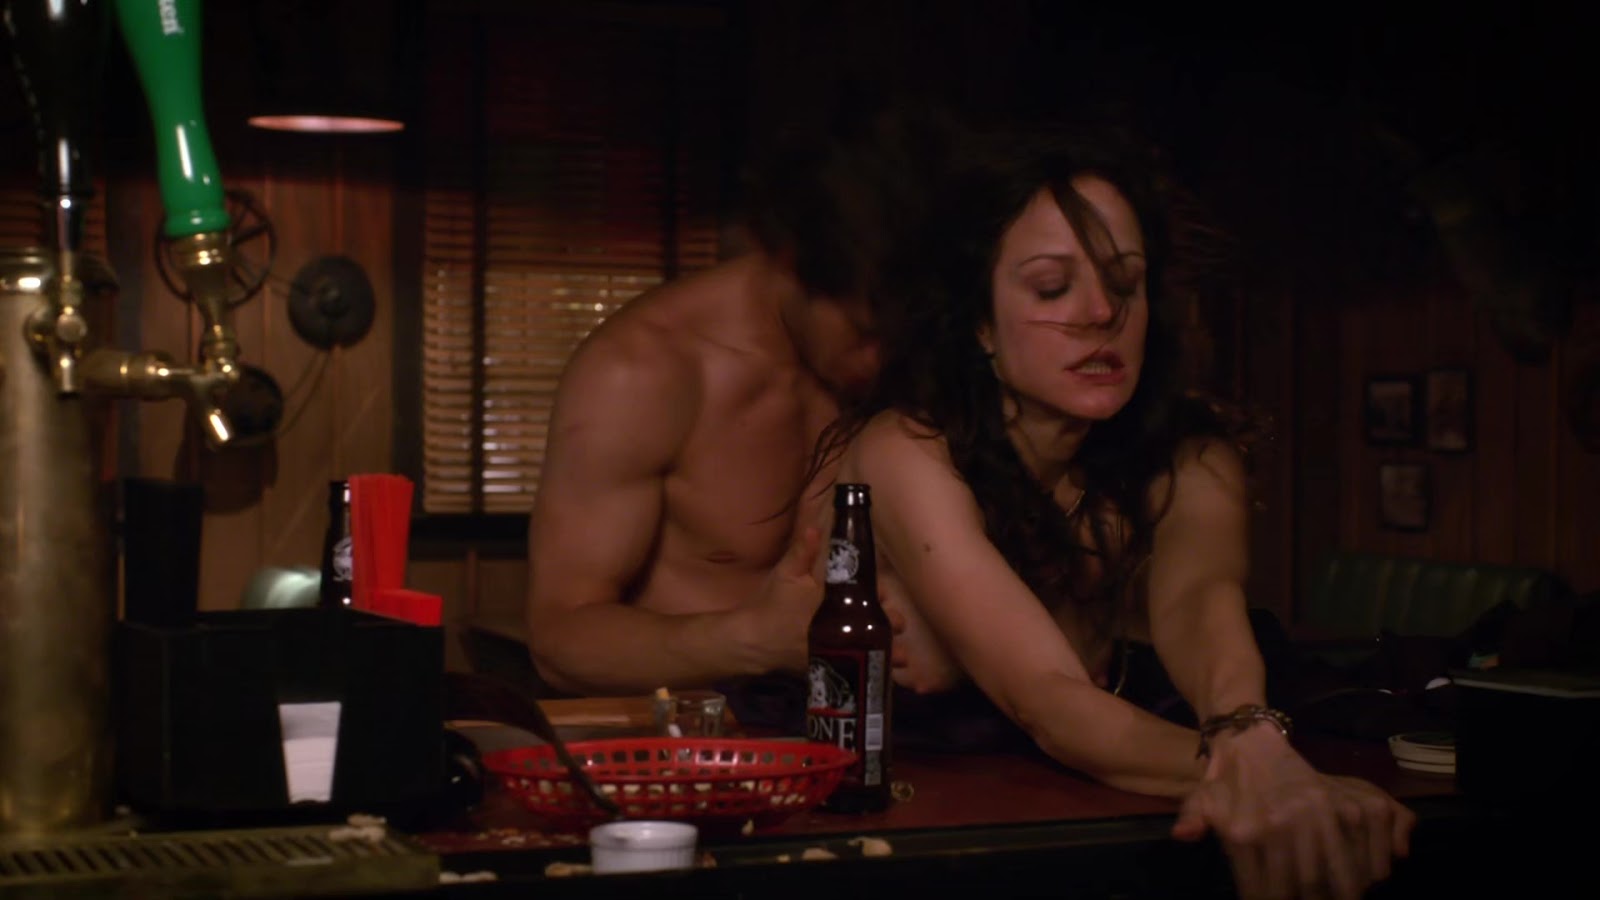 Mary louise parker nude boobs bush.